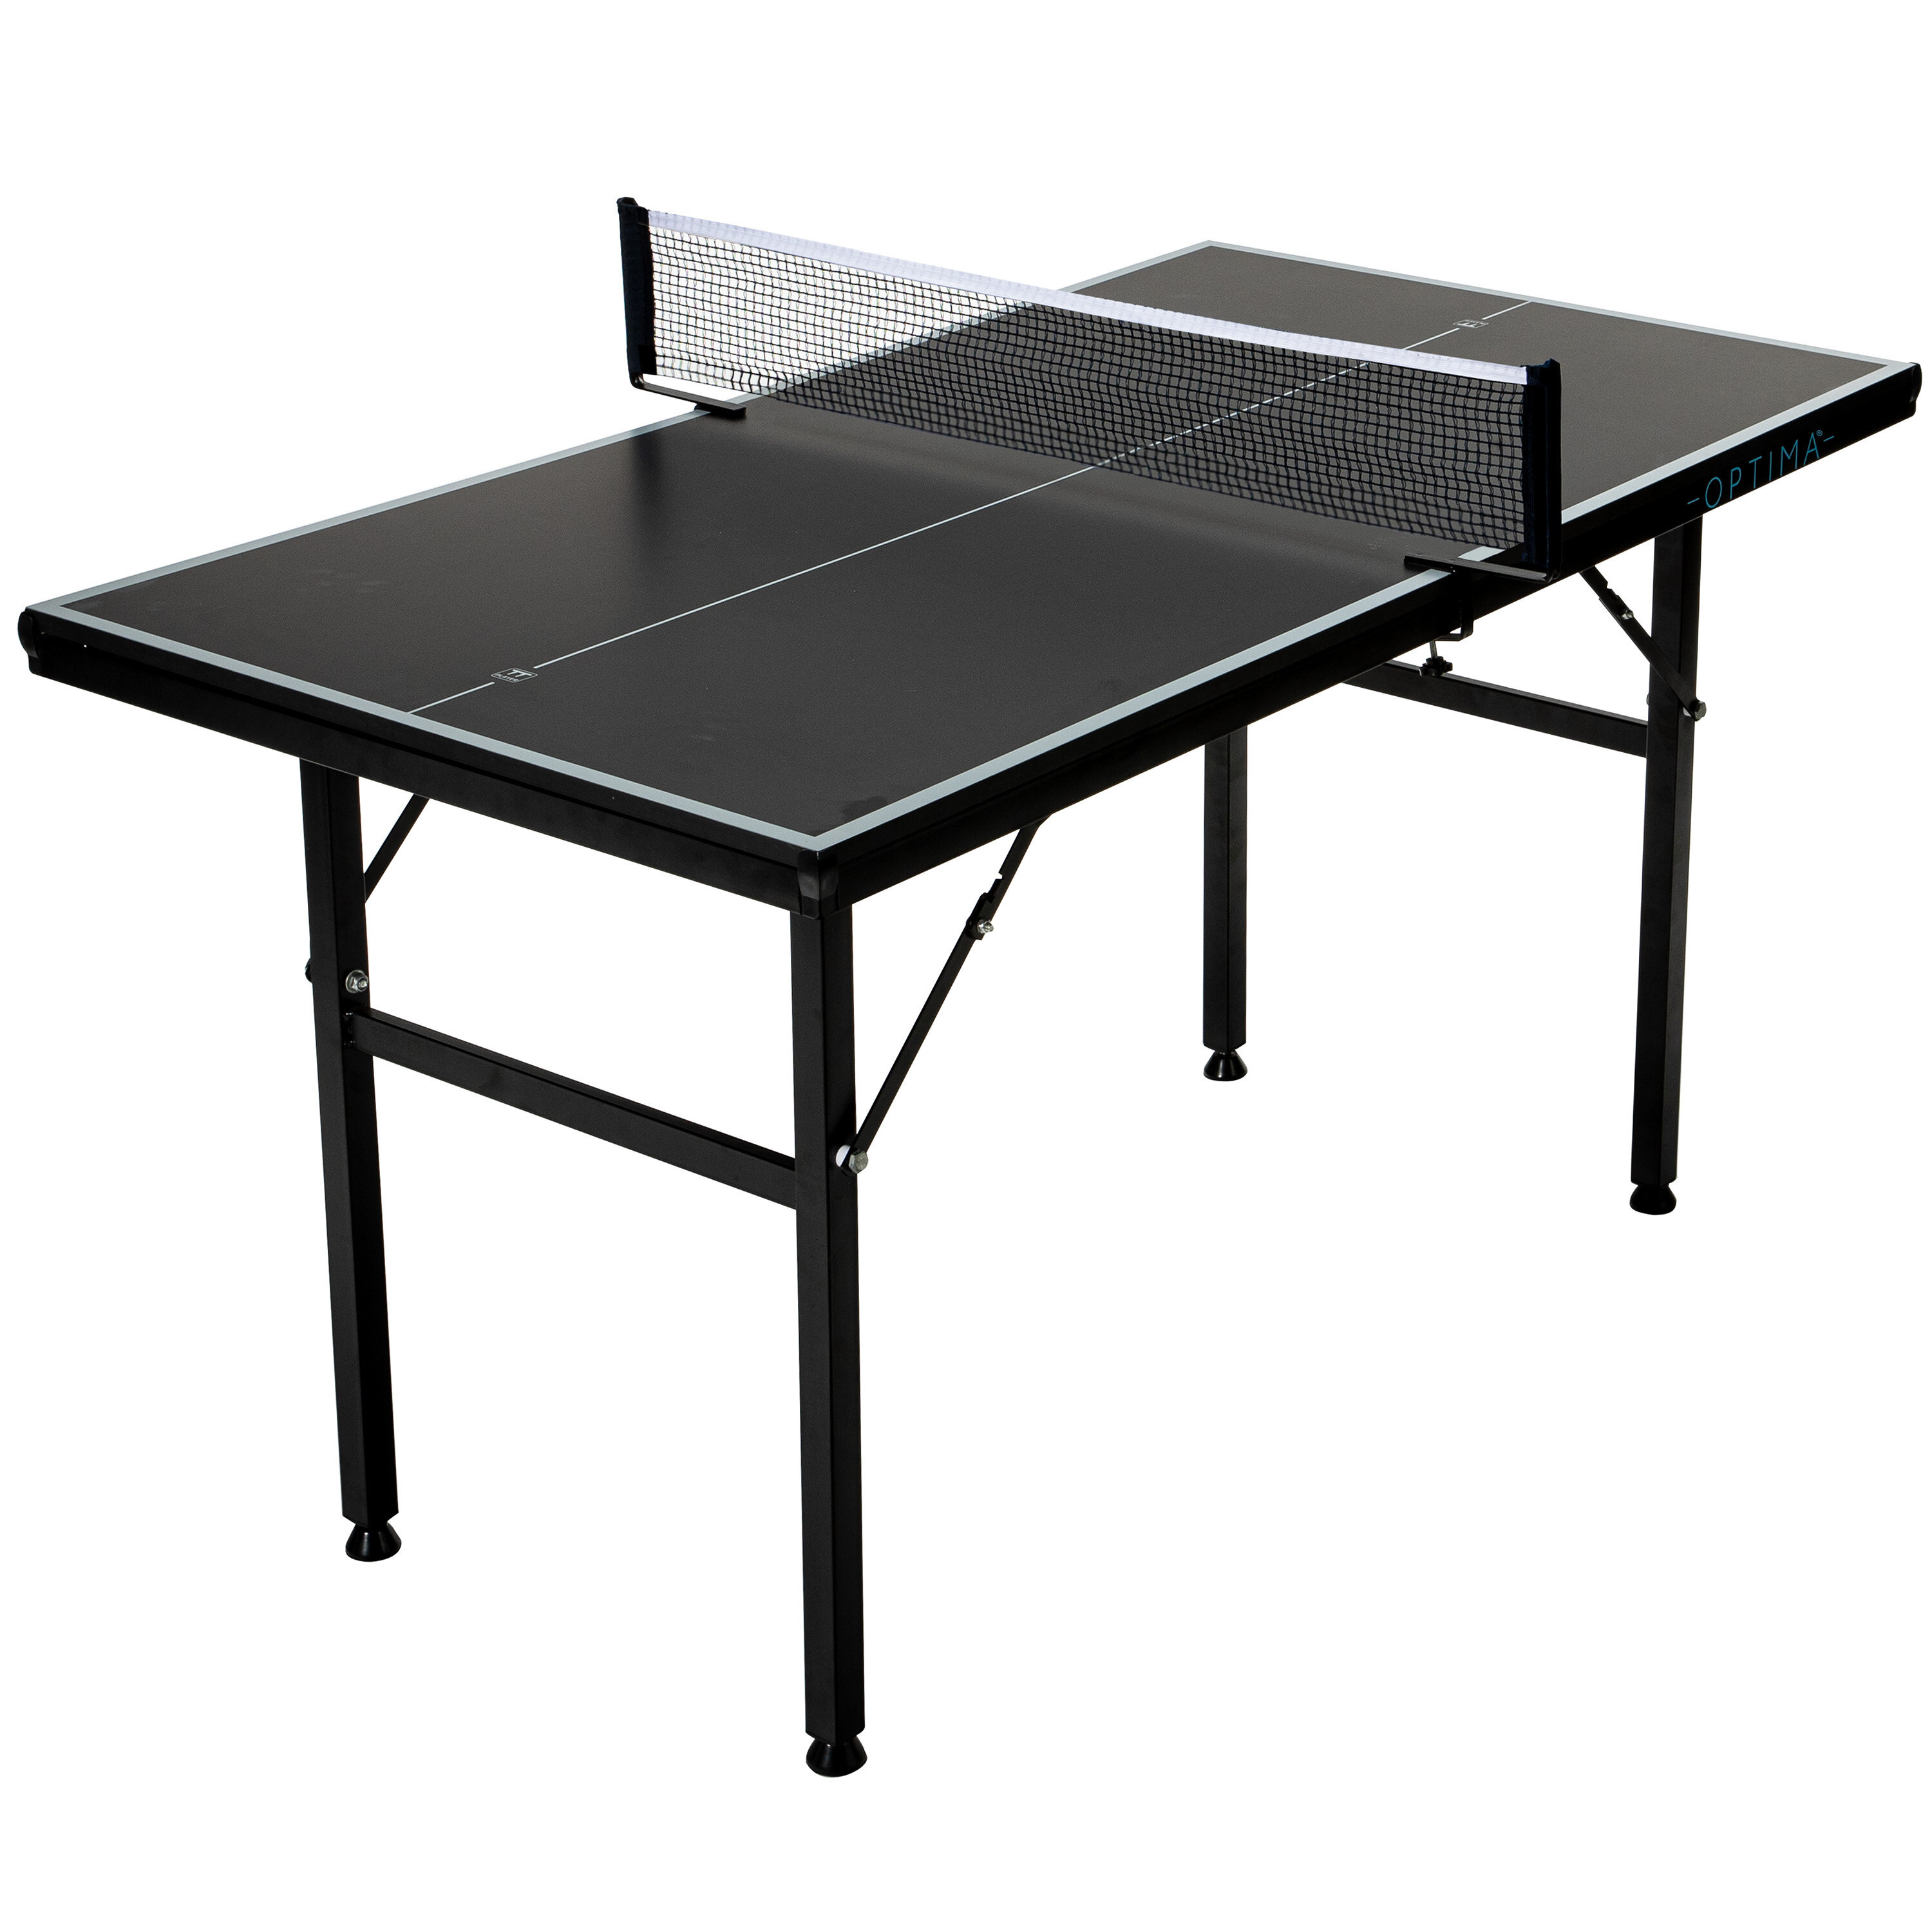 Indoor Table Tennis Ping Pong 9' Folding Official Size Game Room Activity Sports 